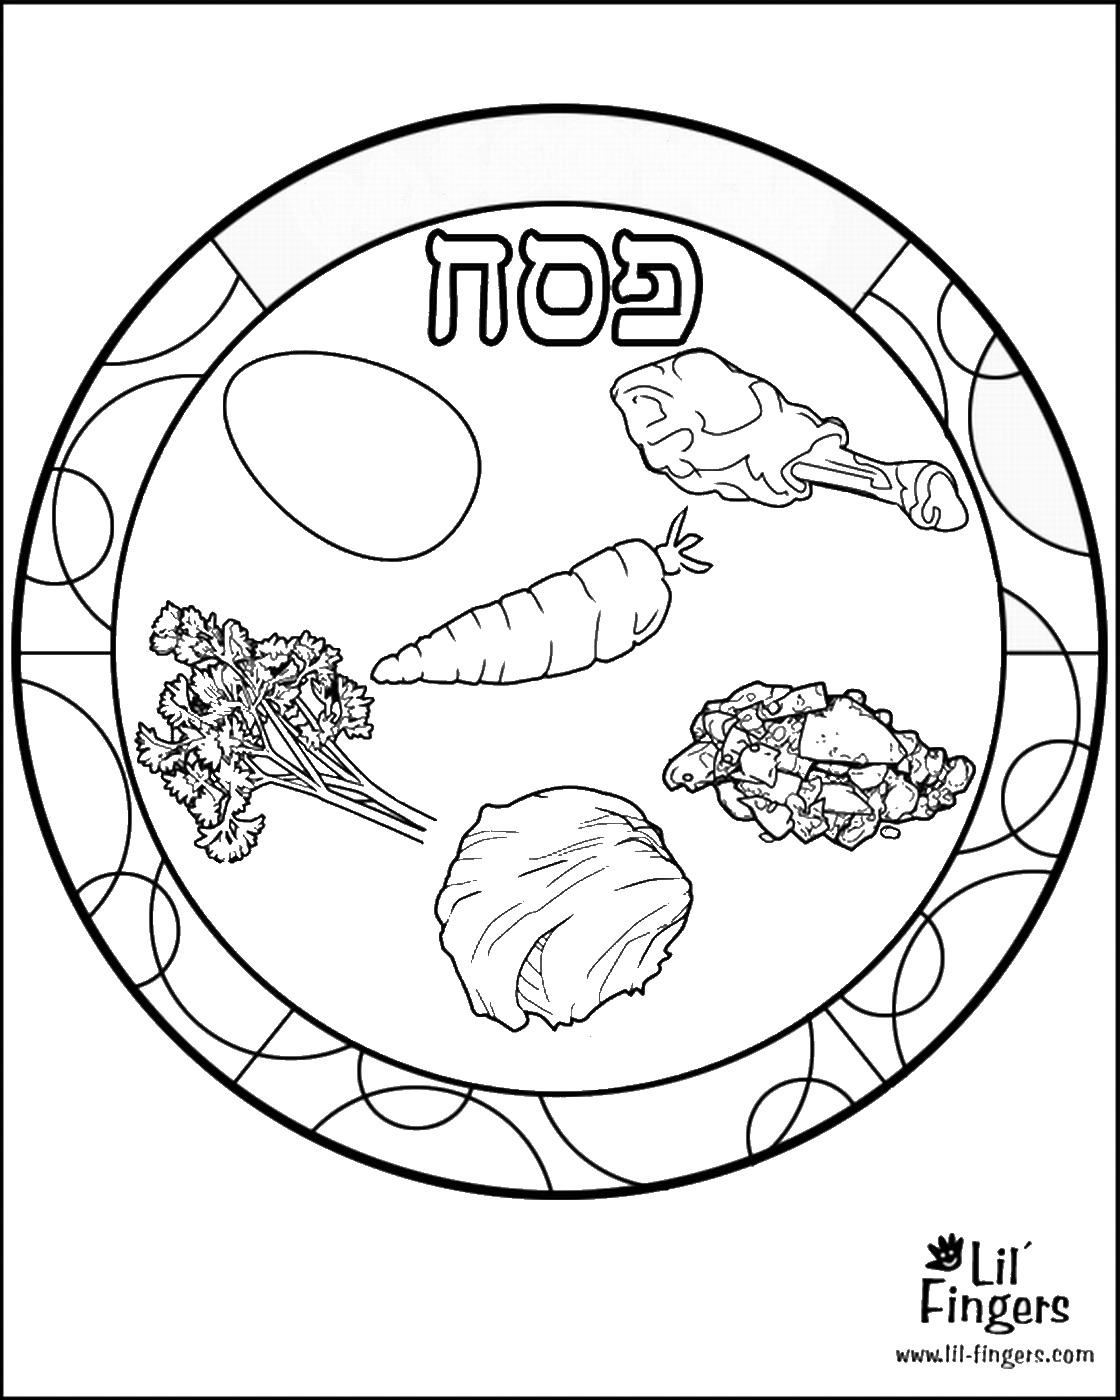 9 Top Image Passover Coloring